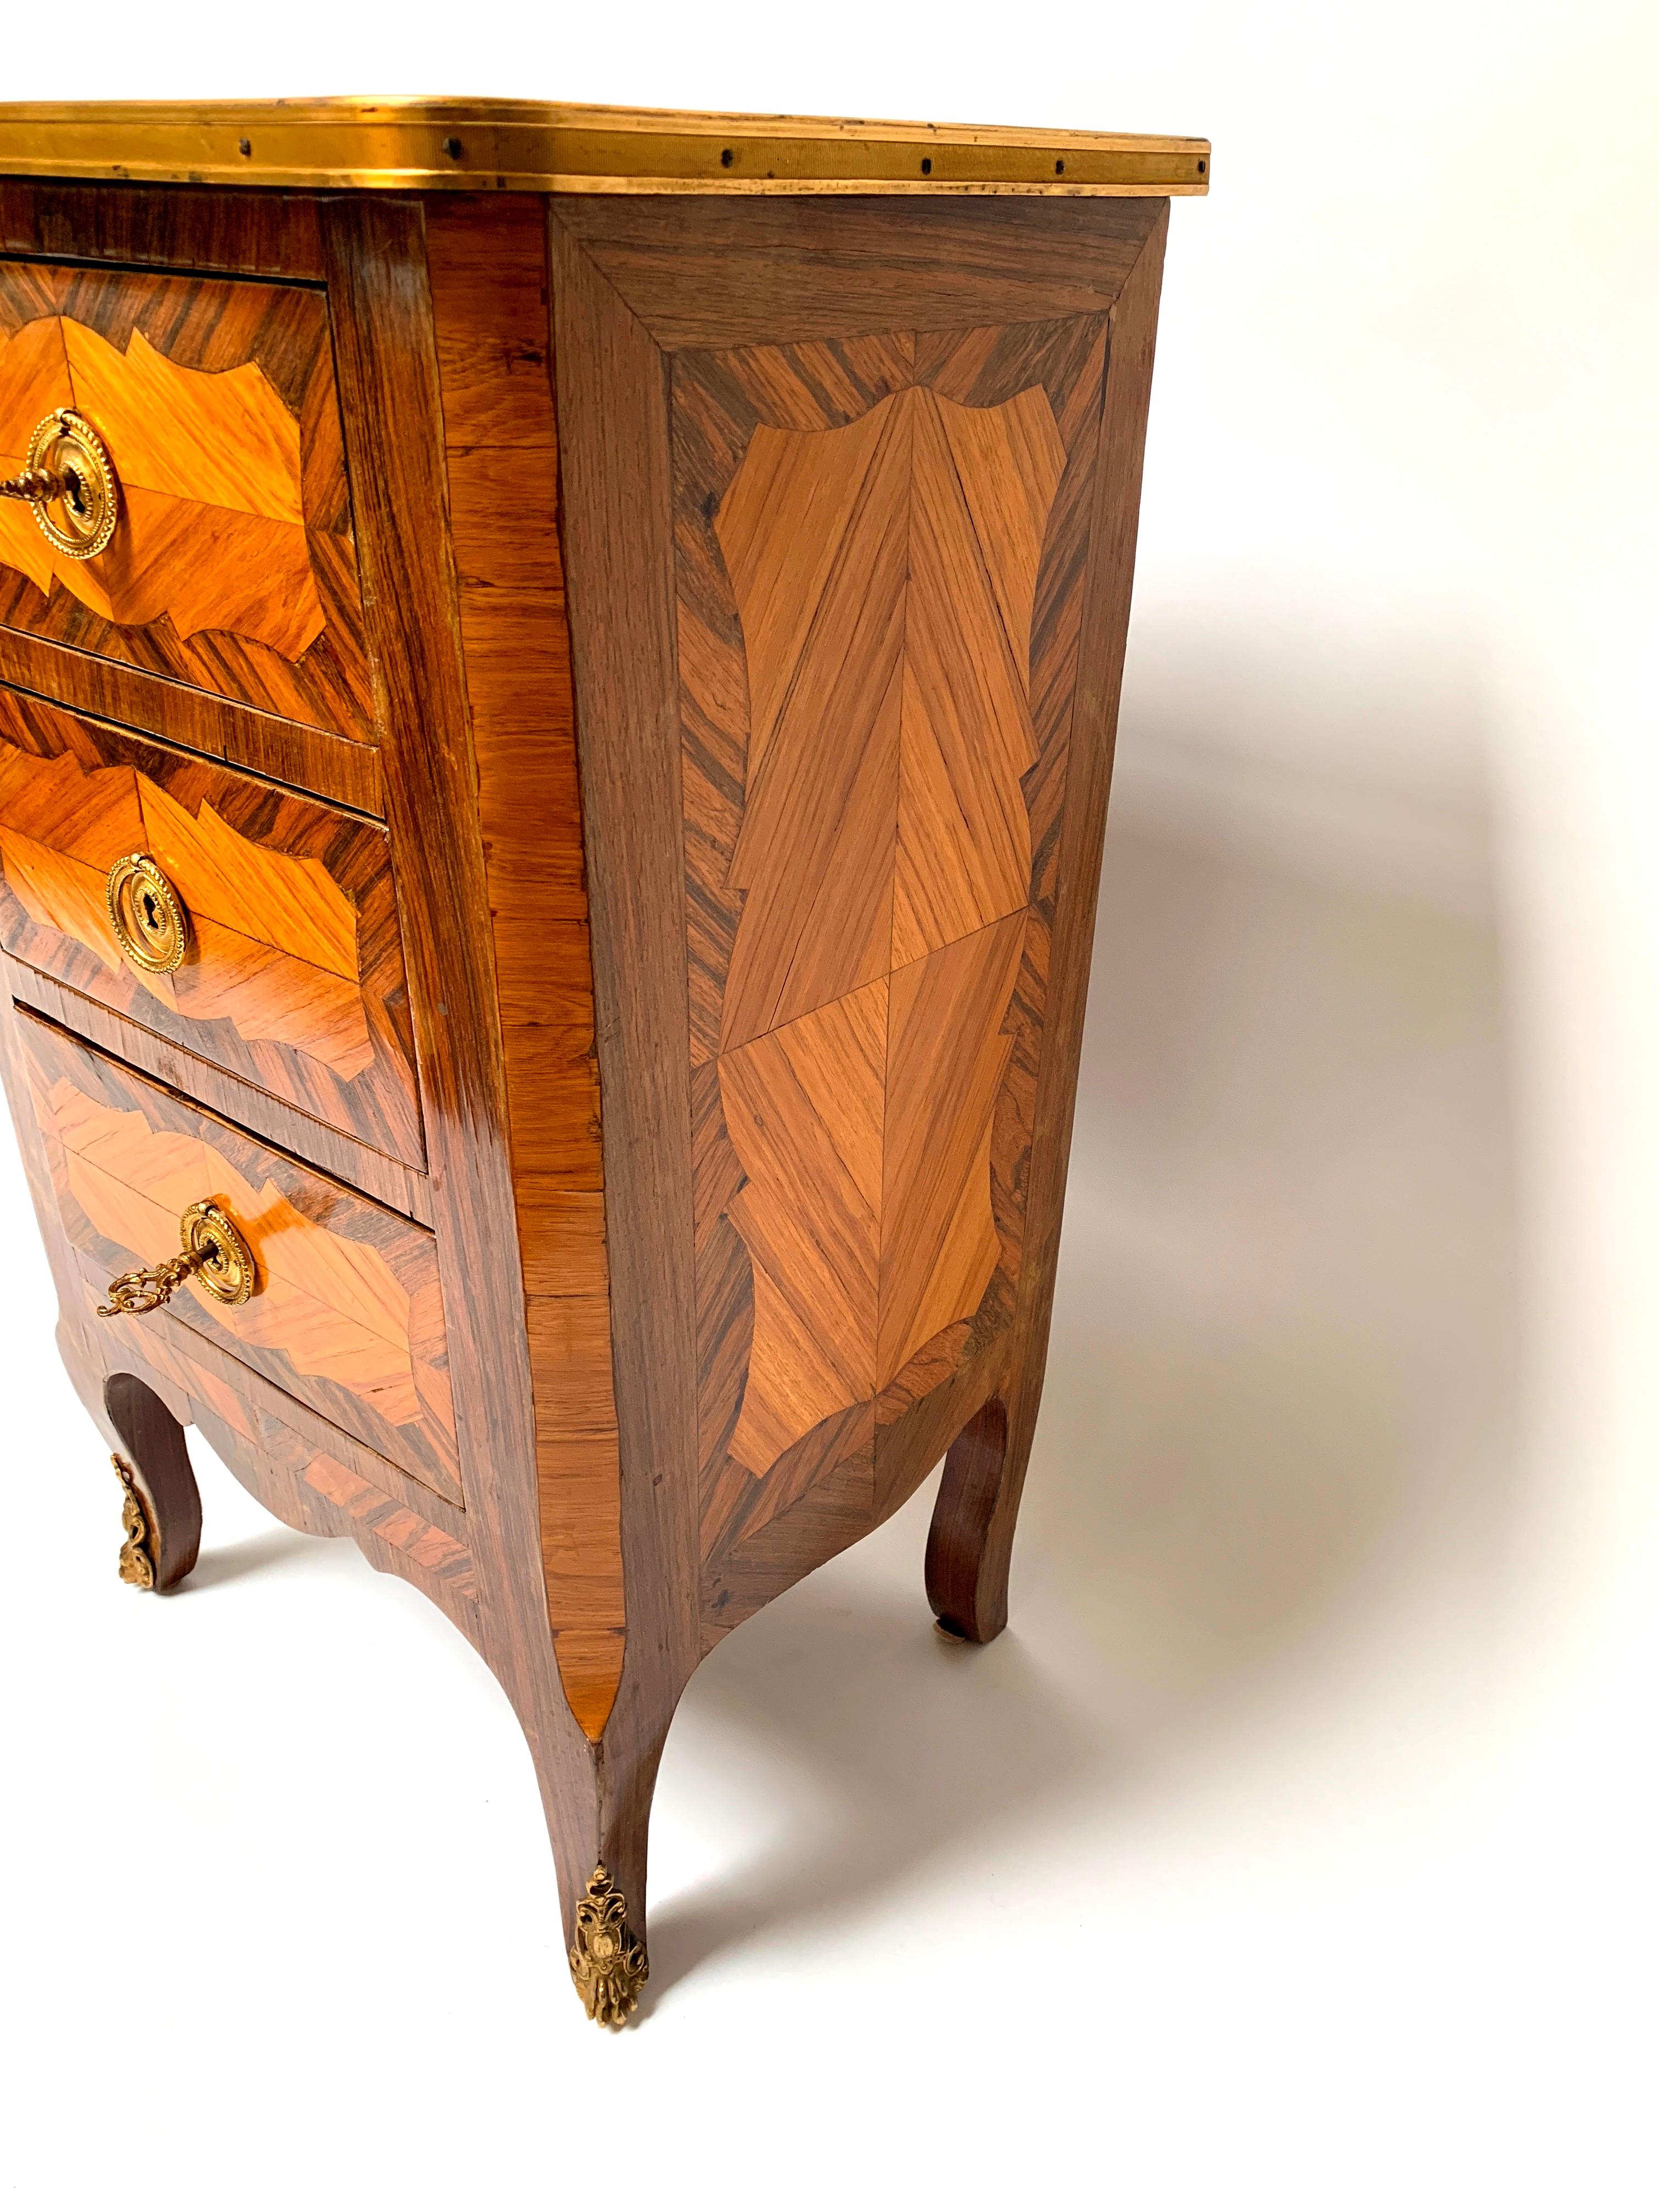 A lovely 18th century small commode in rosewood and Kingwood with inlaid marquetry, transition from Louis XV-Louis XVI period, circa 1760-1770.